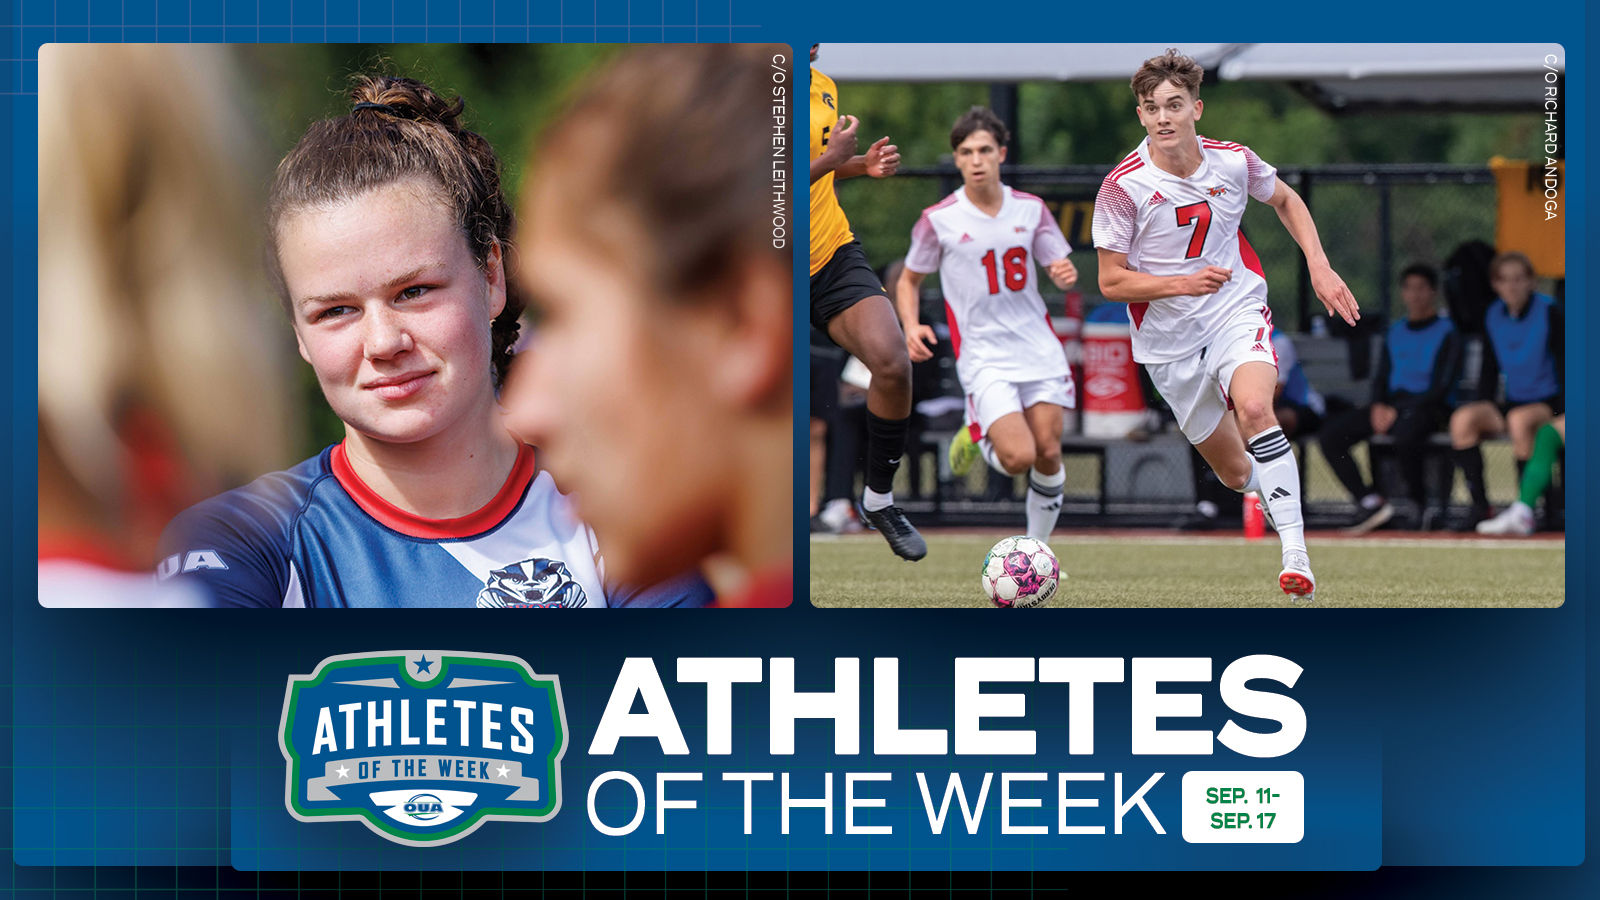 Shaded blue background with two images. Left: Close-up photo of young woman's face framed by out-of-focus teammates. Right: Young man in white and red soccer uniform running on soccer field with ball. Banner reads 'Athletes of the Week' with logo and date range 'September 11 to September 17'.